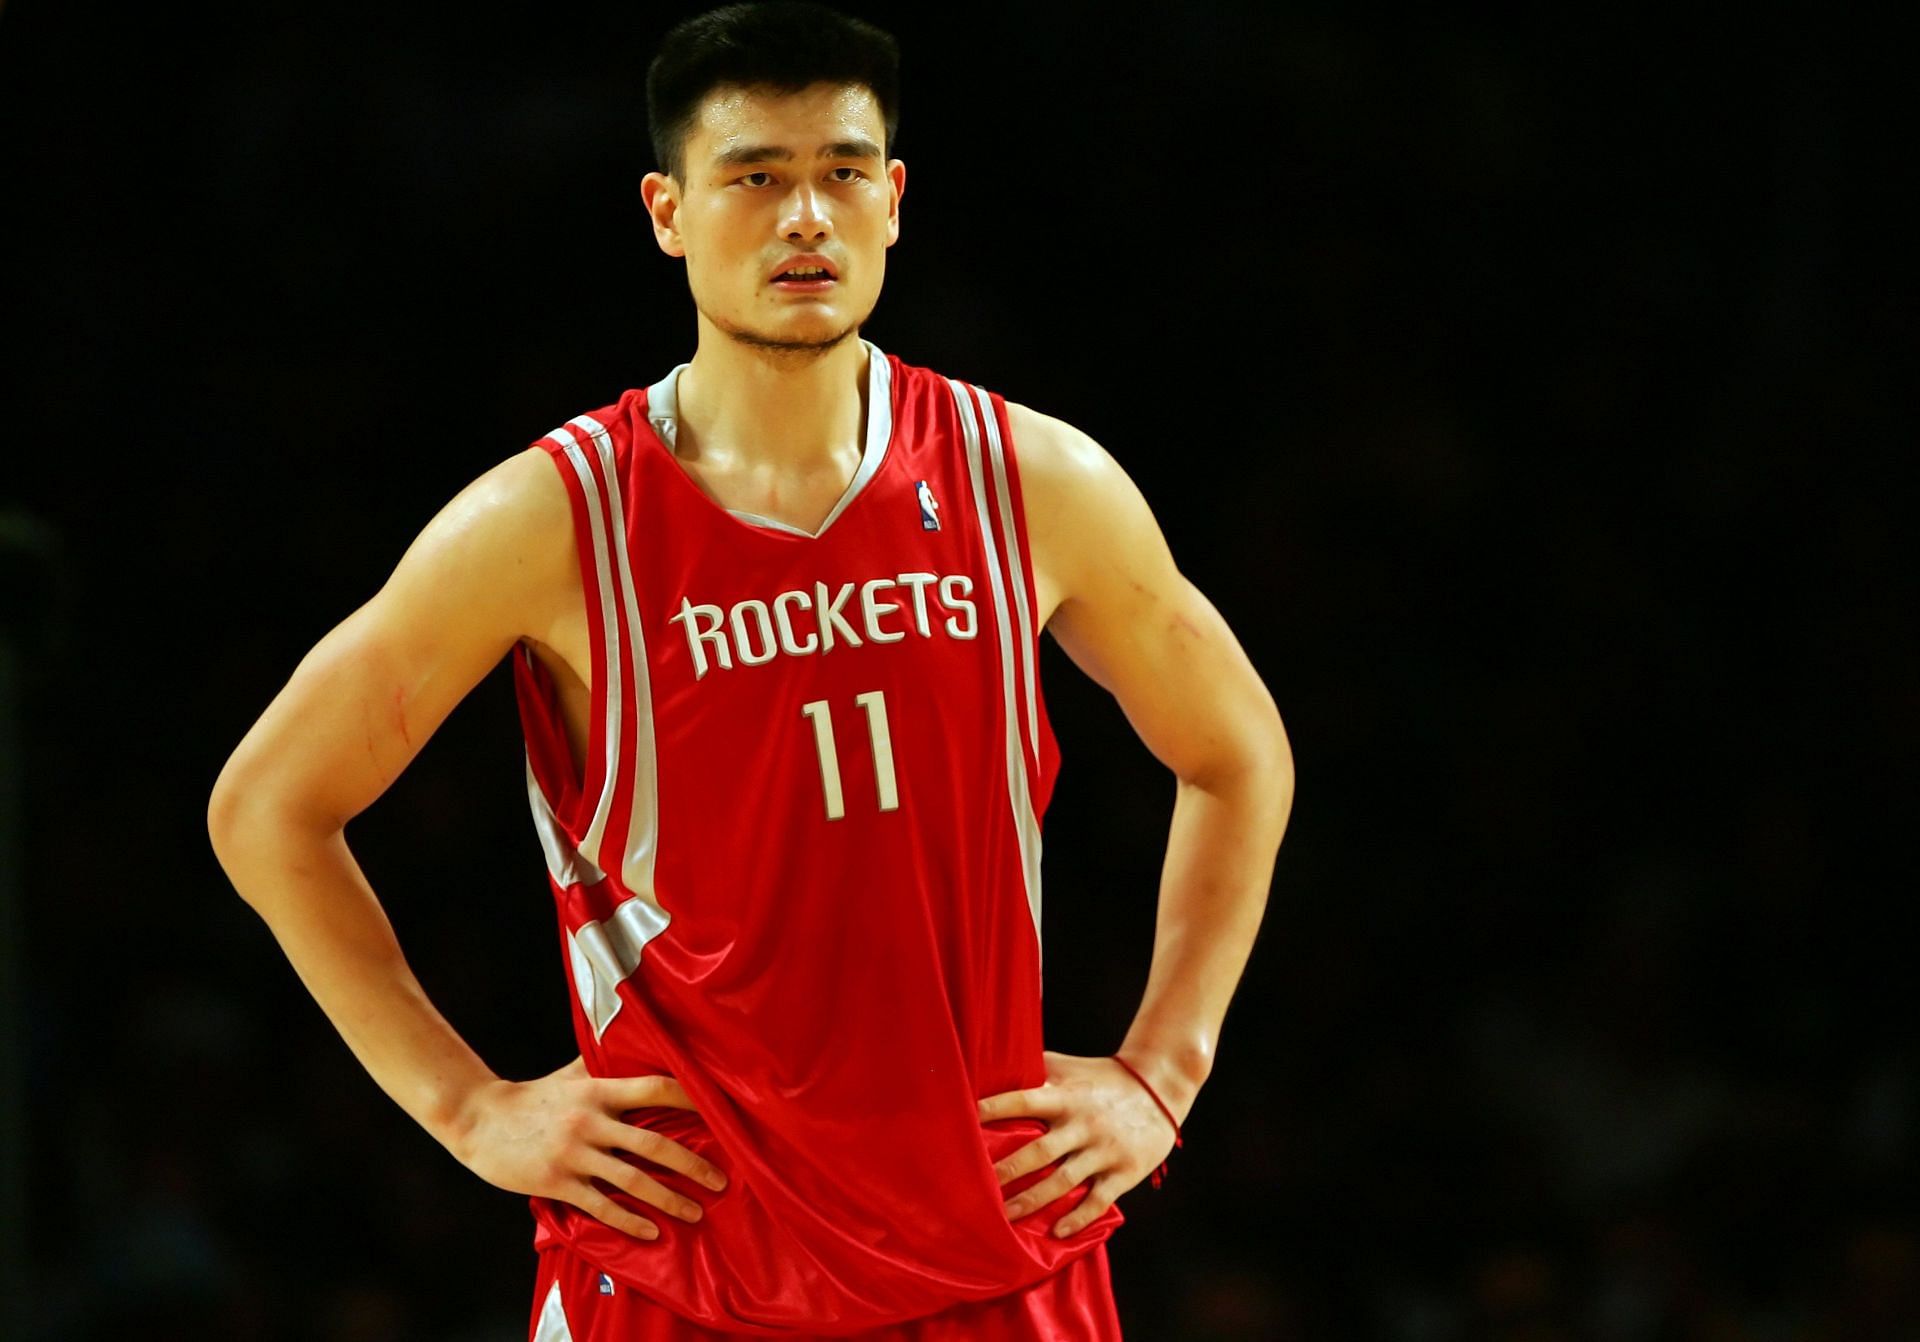 Yao Ming made LeBron James looked like a 6 foot, 180 pound point